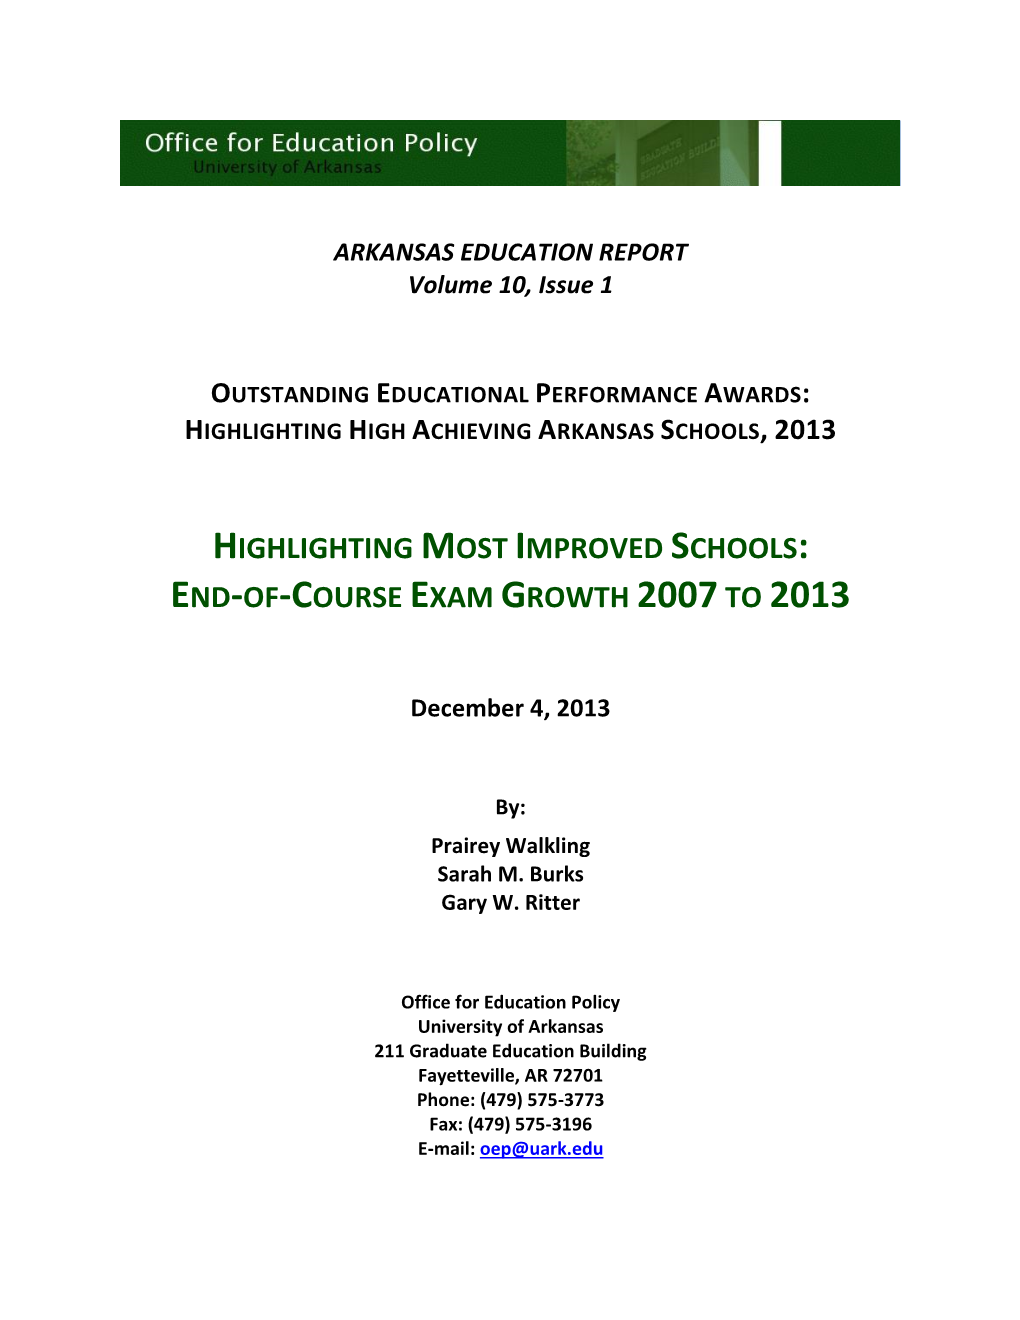 Most Improved Schools: End-Of-Course Exam Growth 2007 to 2013